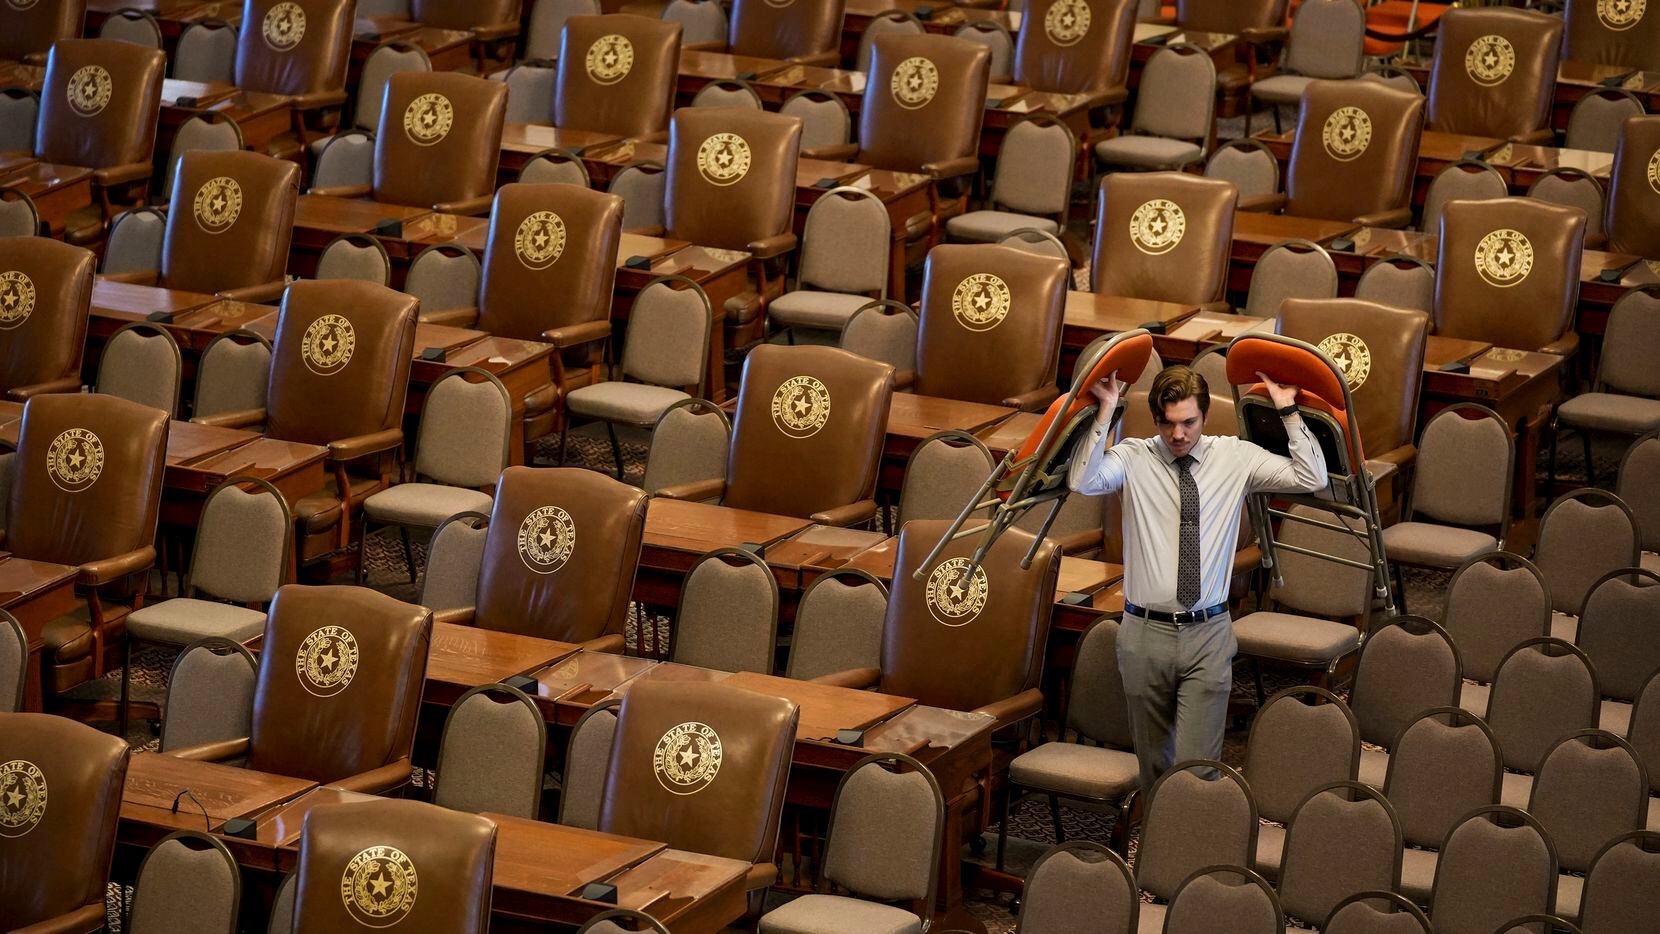 Devan Petersen, a supervisor with the Office of the Sergeant at Arms, sets up temporary...